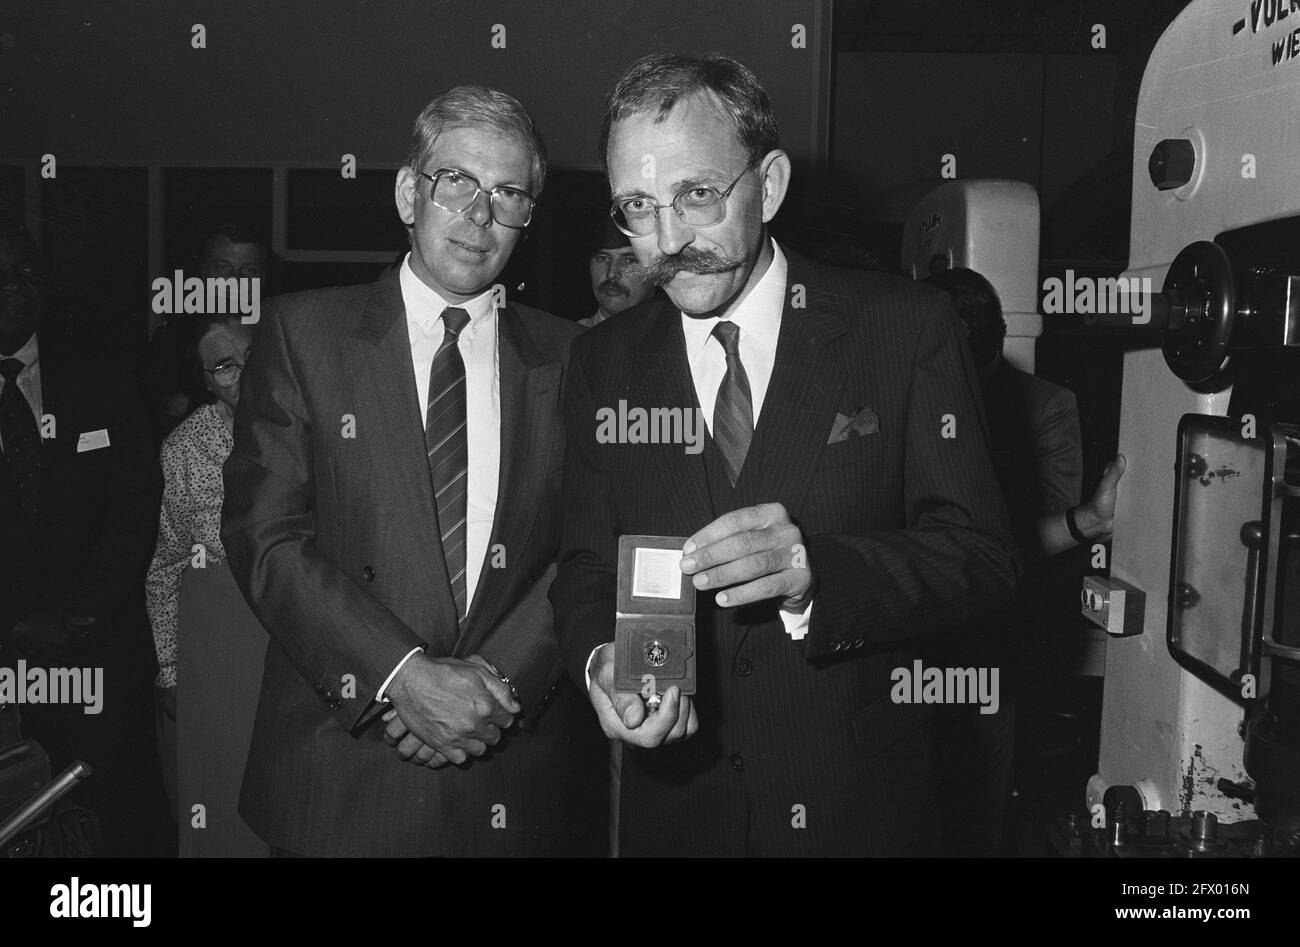 s Rijksmuntmeester ir. J. de Jong (l) and theasaurier-general of the Ministry of Finance C. Maas with the first golden jubilee ducat 1986, 20 August 1986, ducats, anniversaries, The Netherlands, 20th century press agency photo, news to remember, documentary, historic photography 1945-1990, visual stories, human history of the Twentieth Century, capturing moments in time Stock Photo